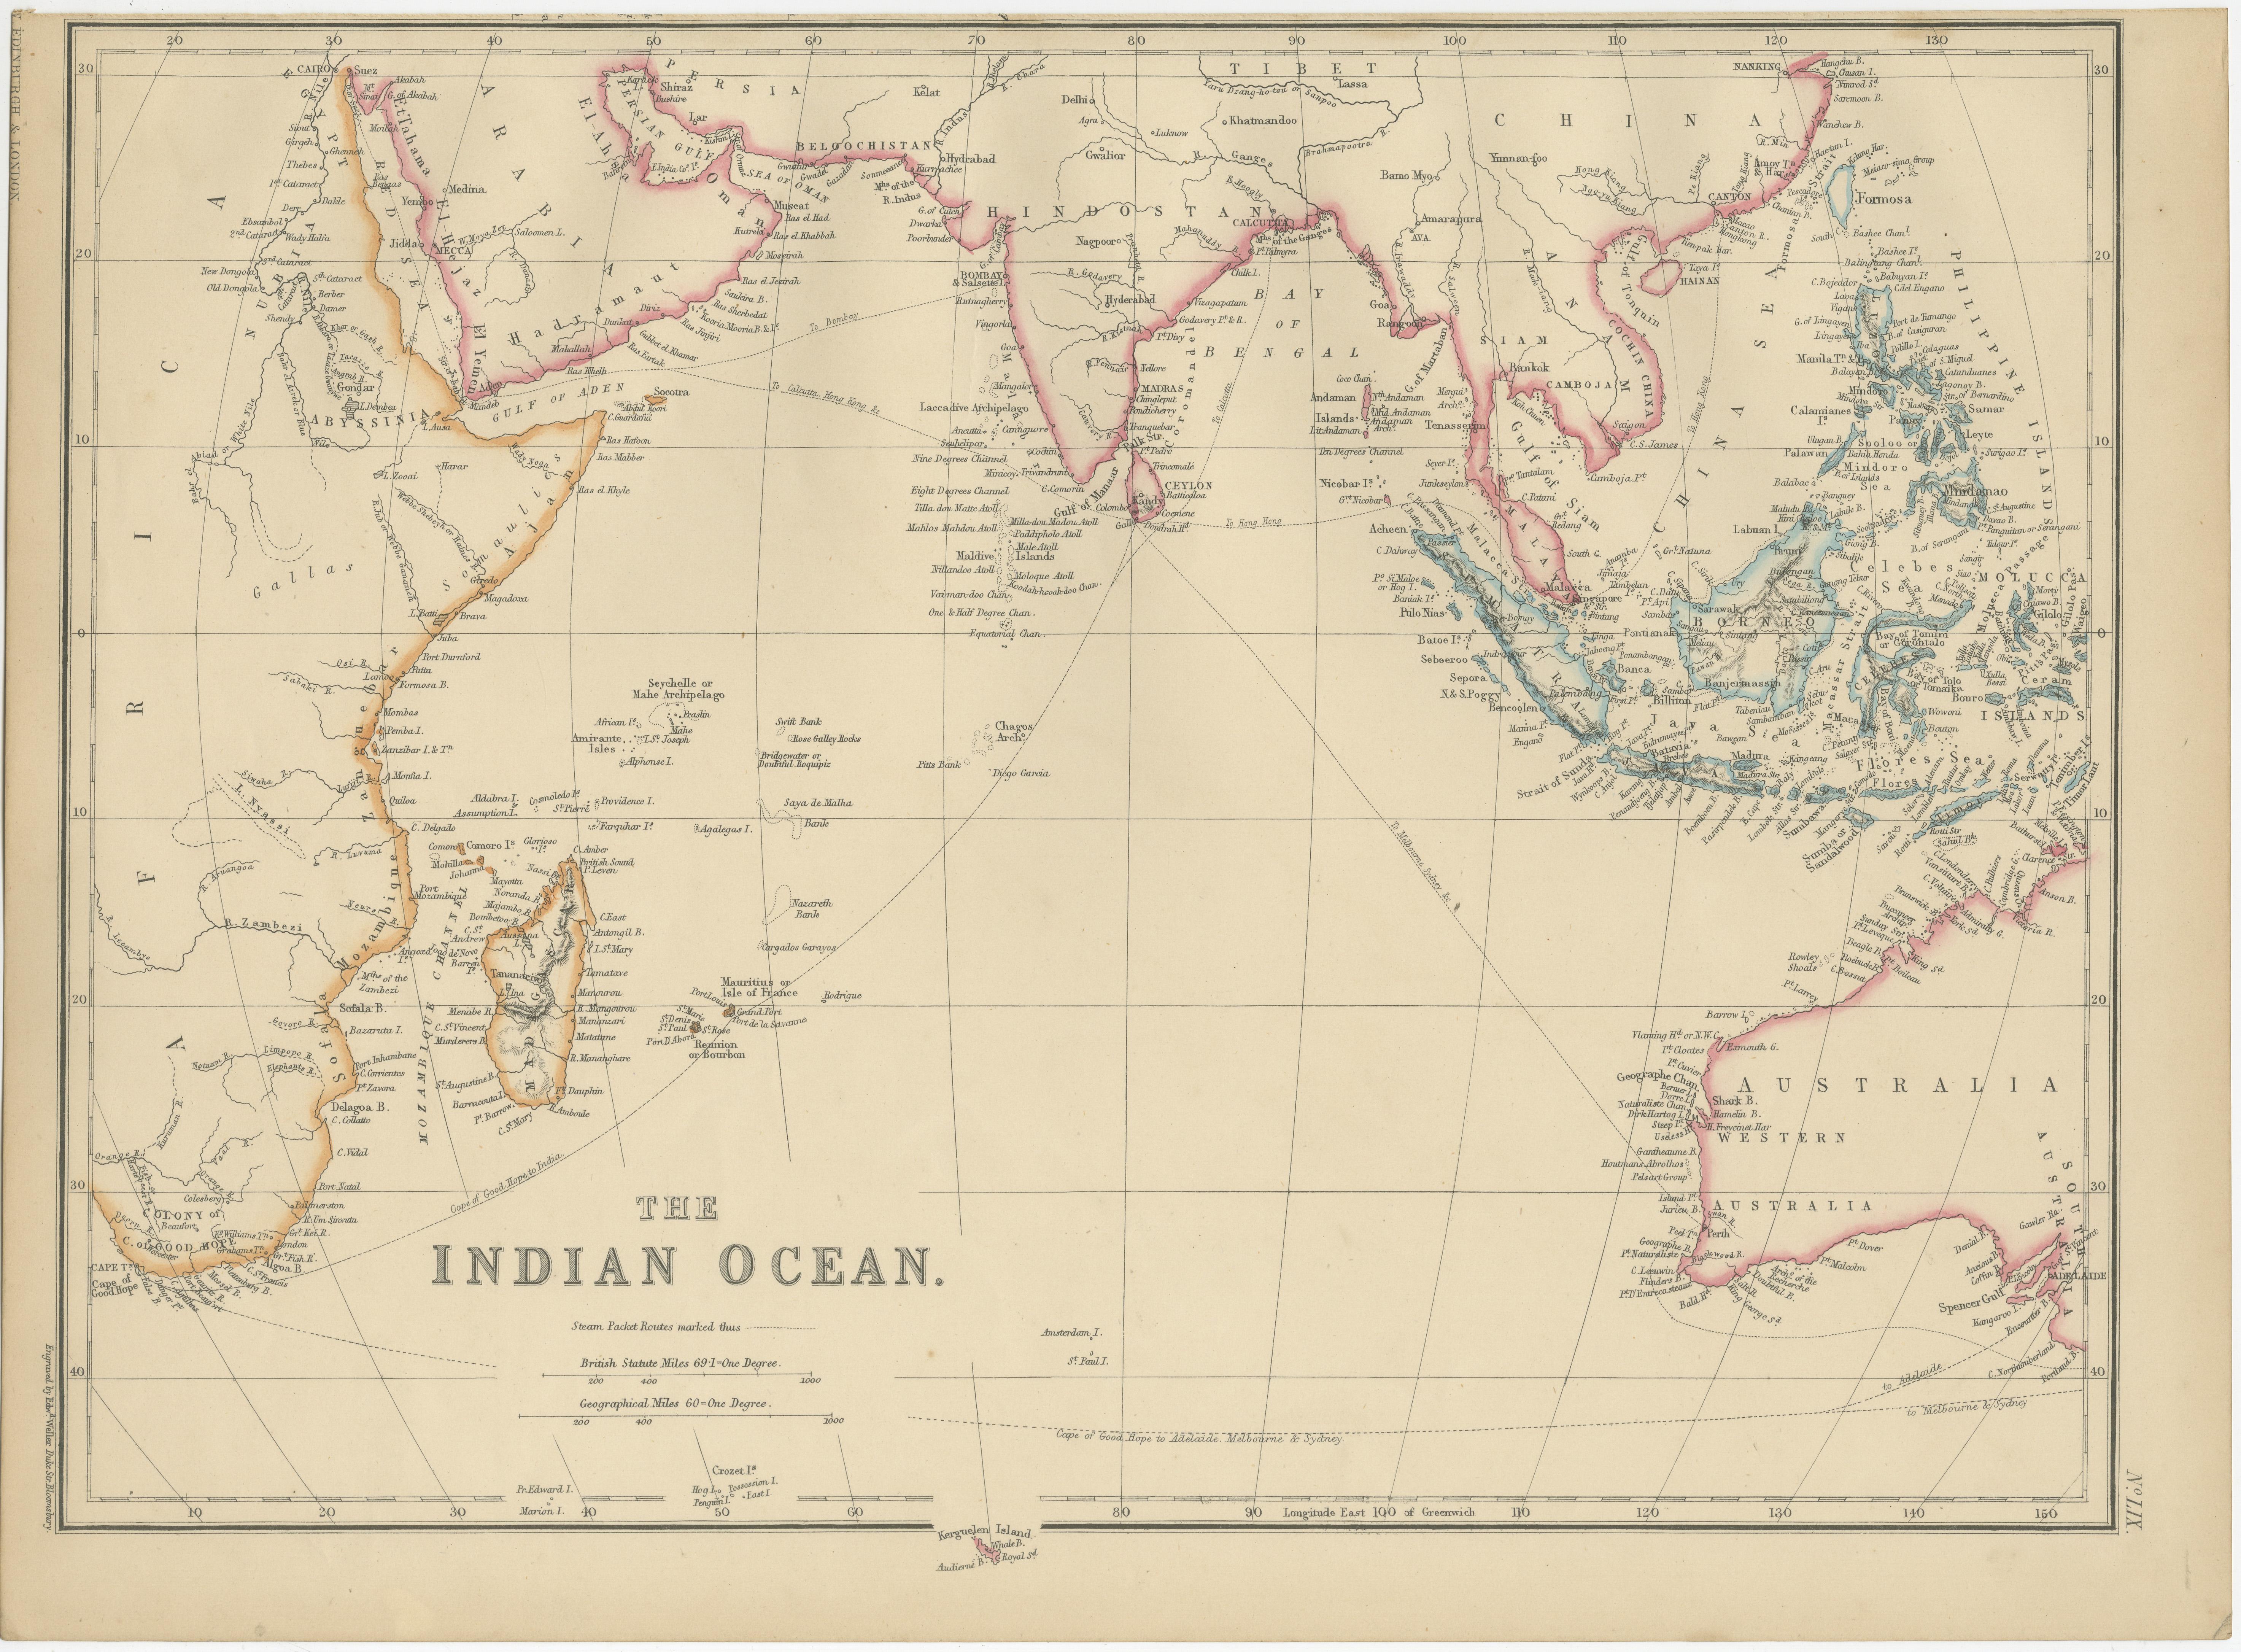 Antique map titled 'The Indian Ocean'. Original antique map of the Indian Ocean. This map originates from ‘The Imperial Atlas of Modern Geography’. Published by W. G. Blackie, 1859.